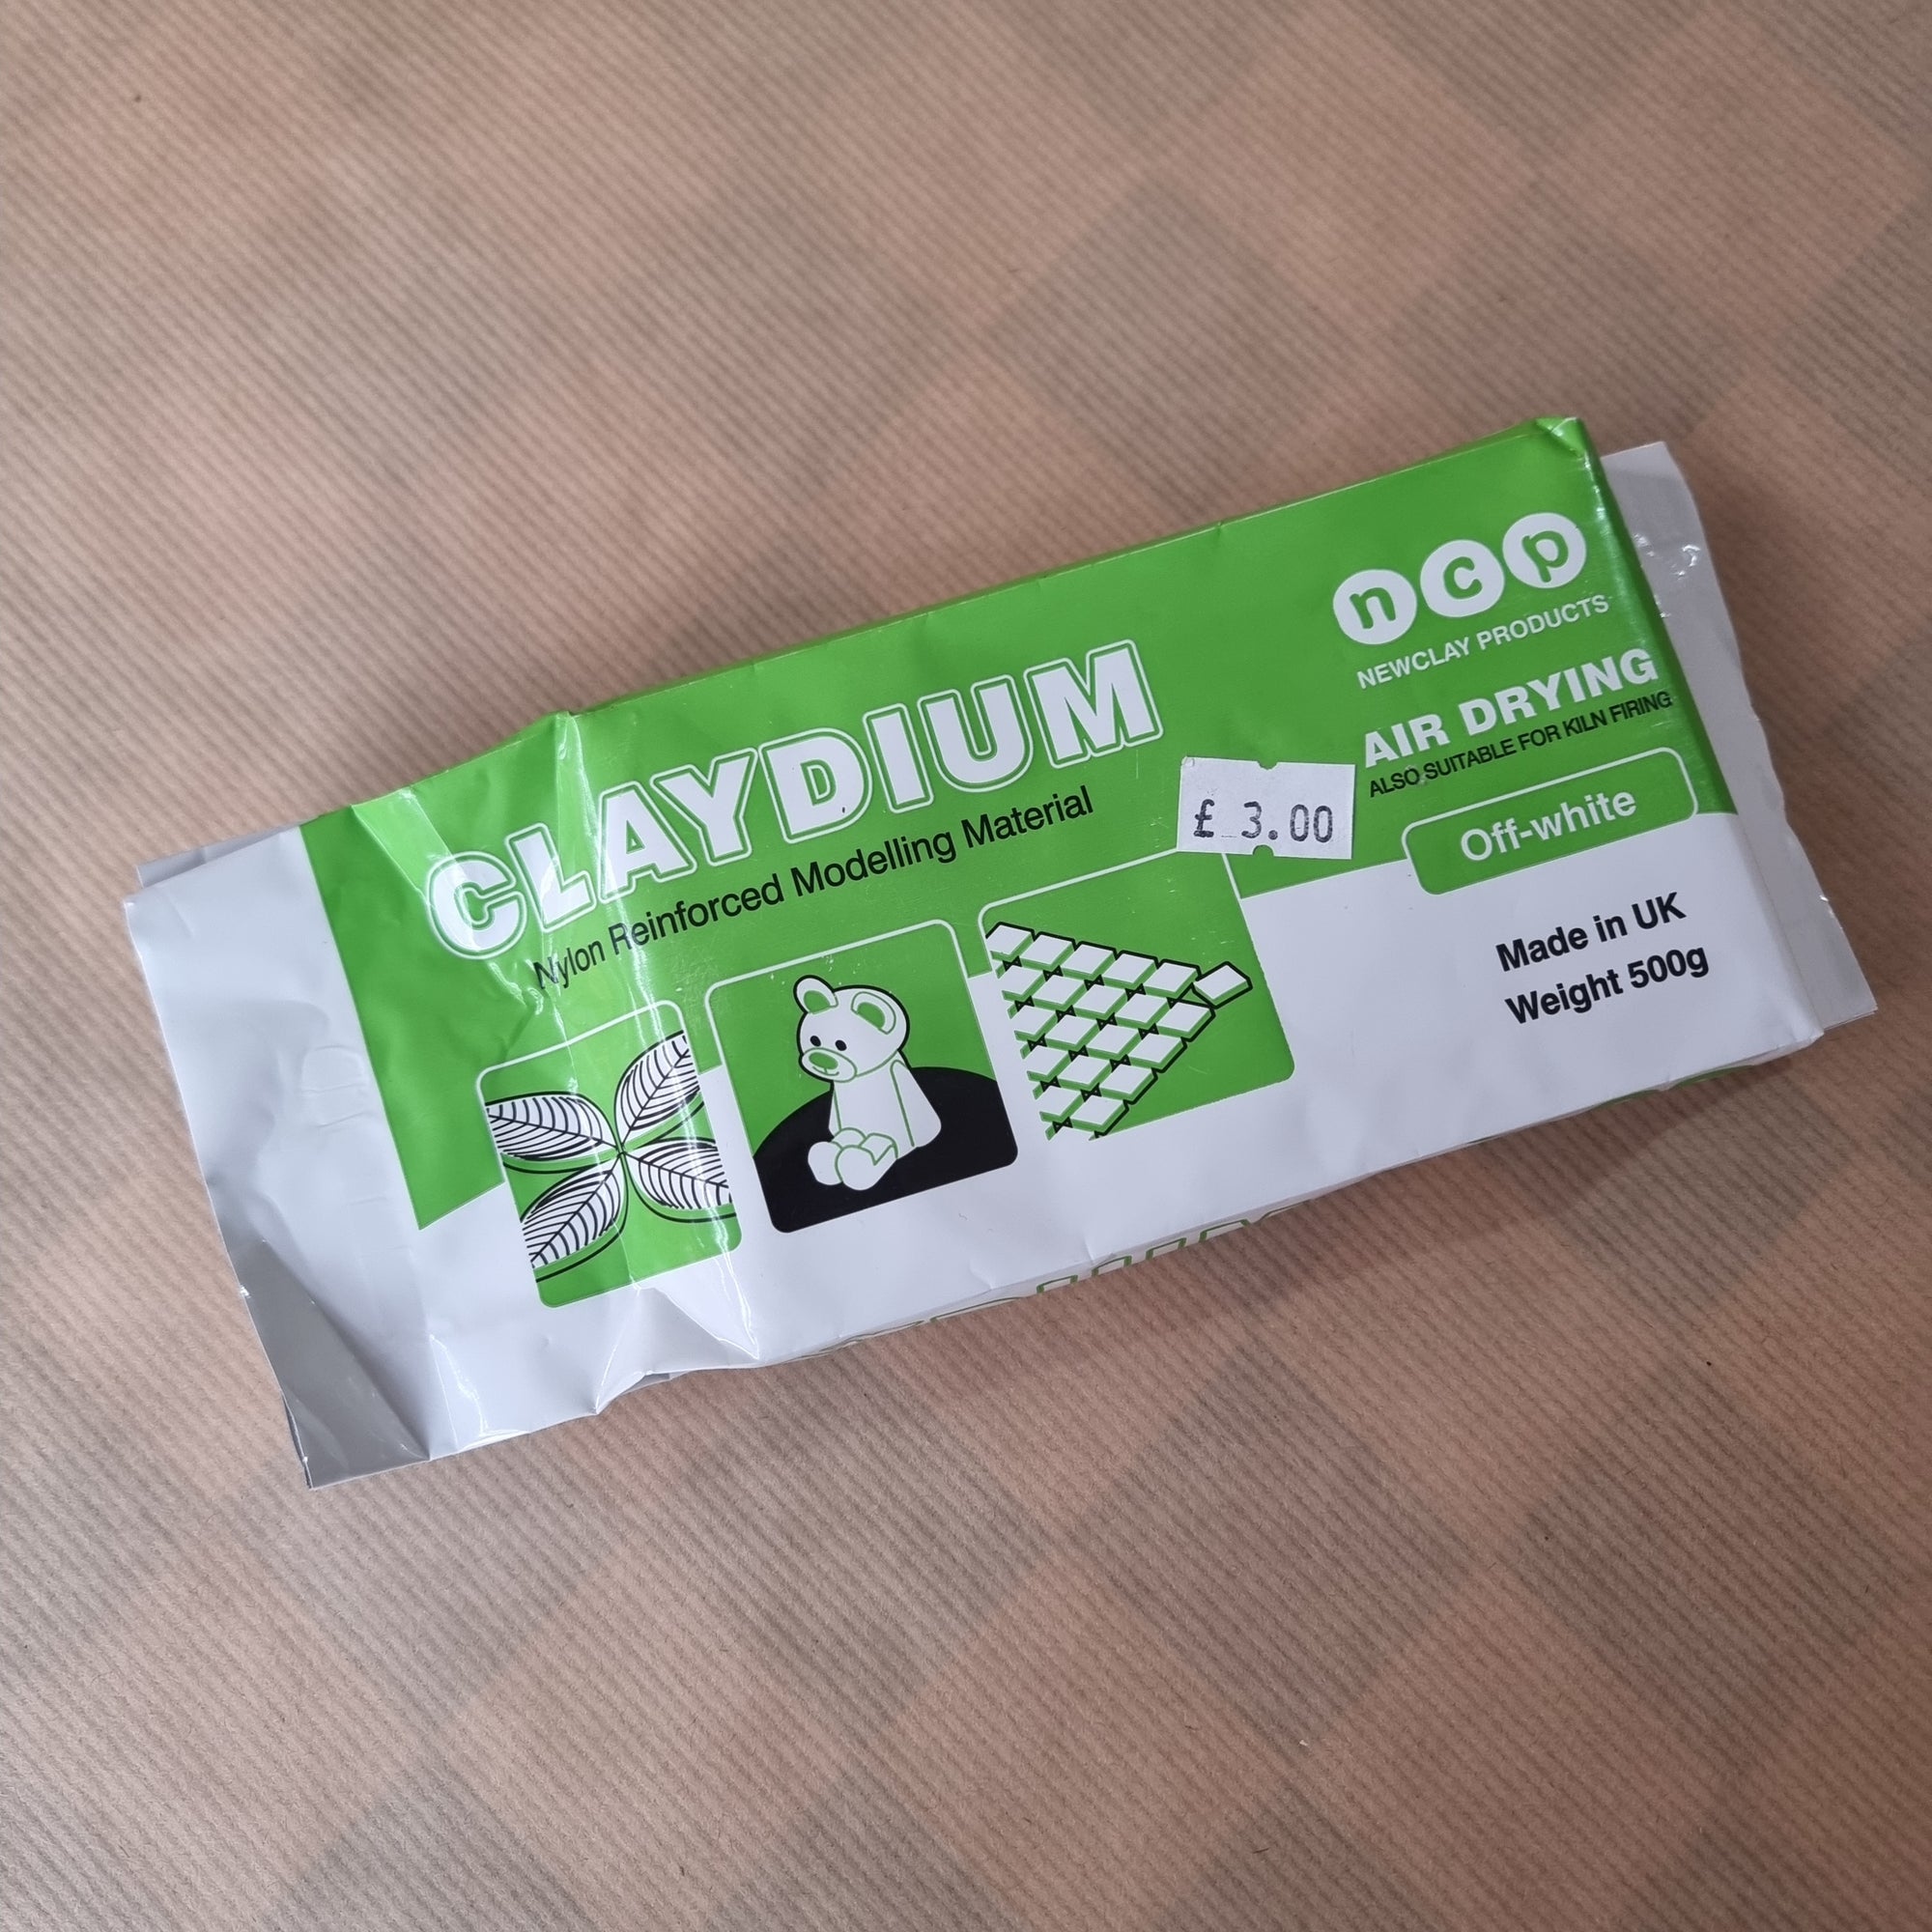 Claydium Air Drying Modelling Material